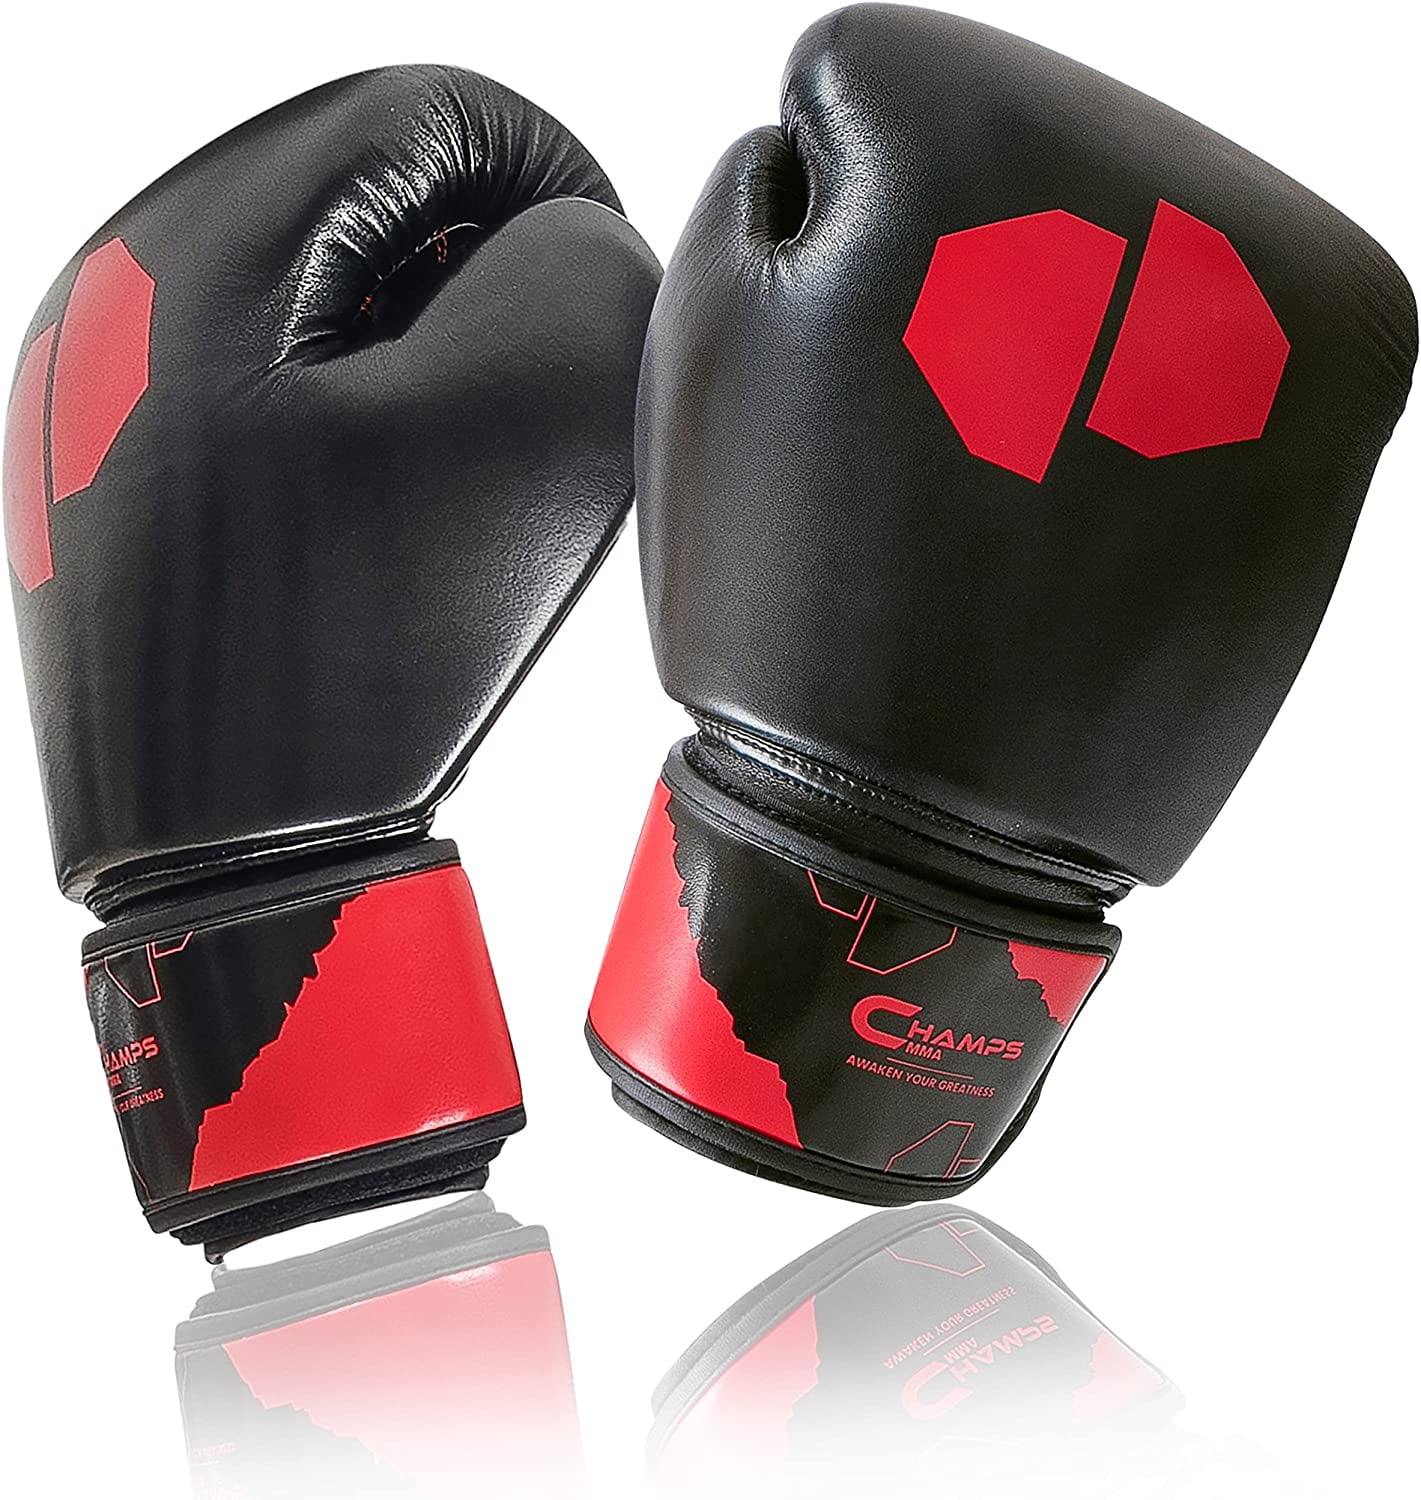 Training Boxing gloves for men and women MMA Kickboxing Padded Fist Protector M 